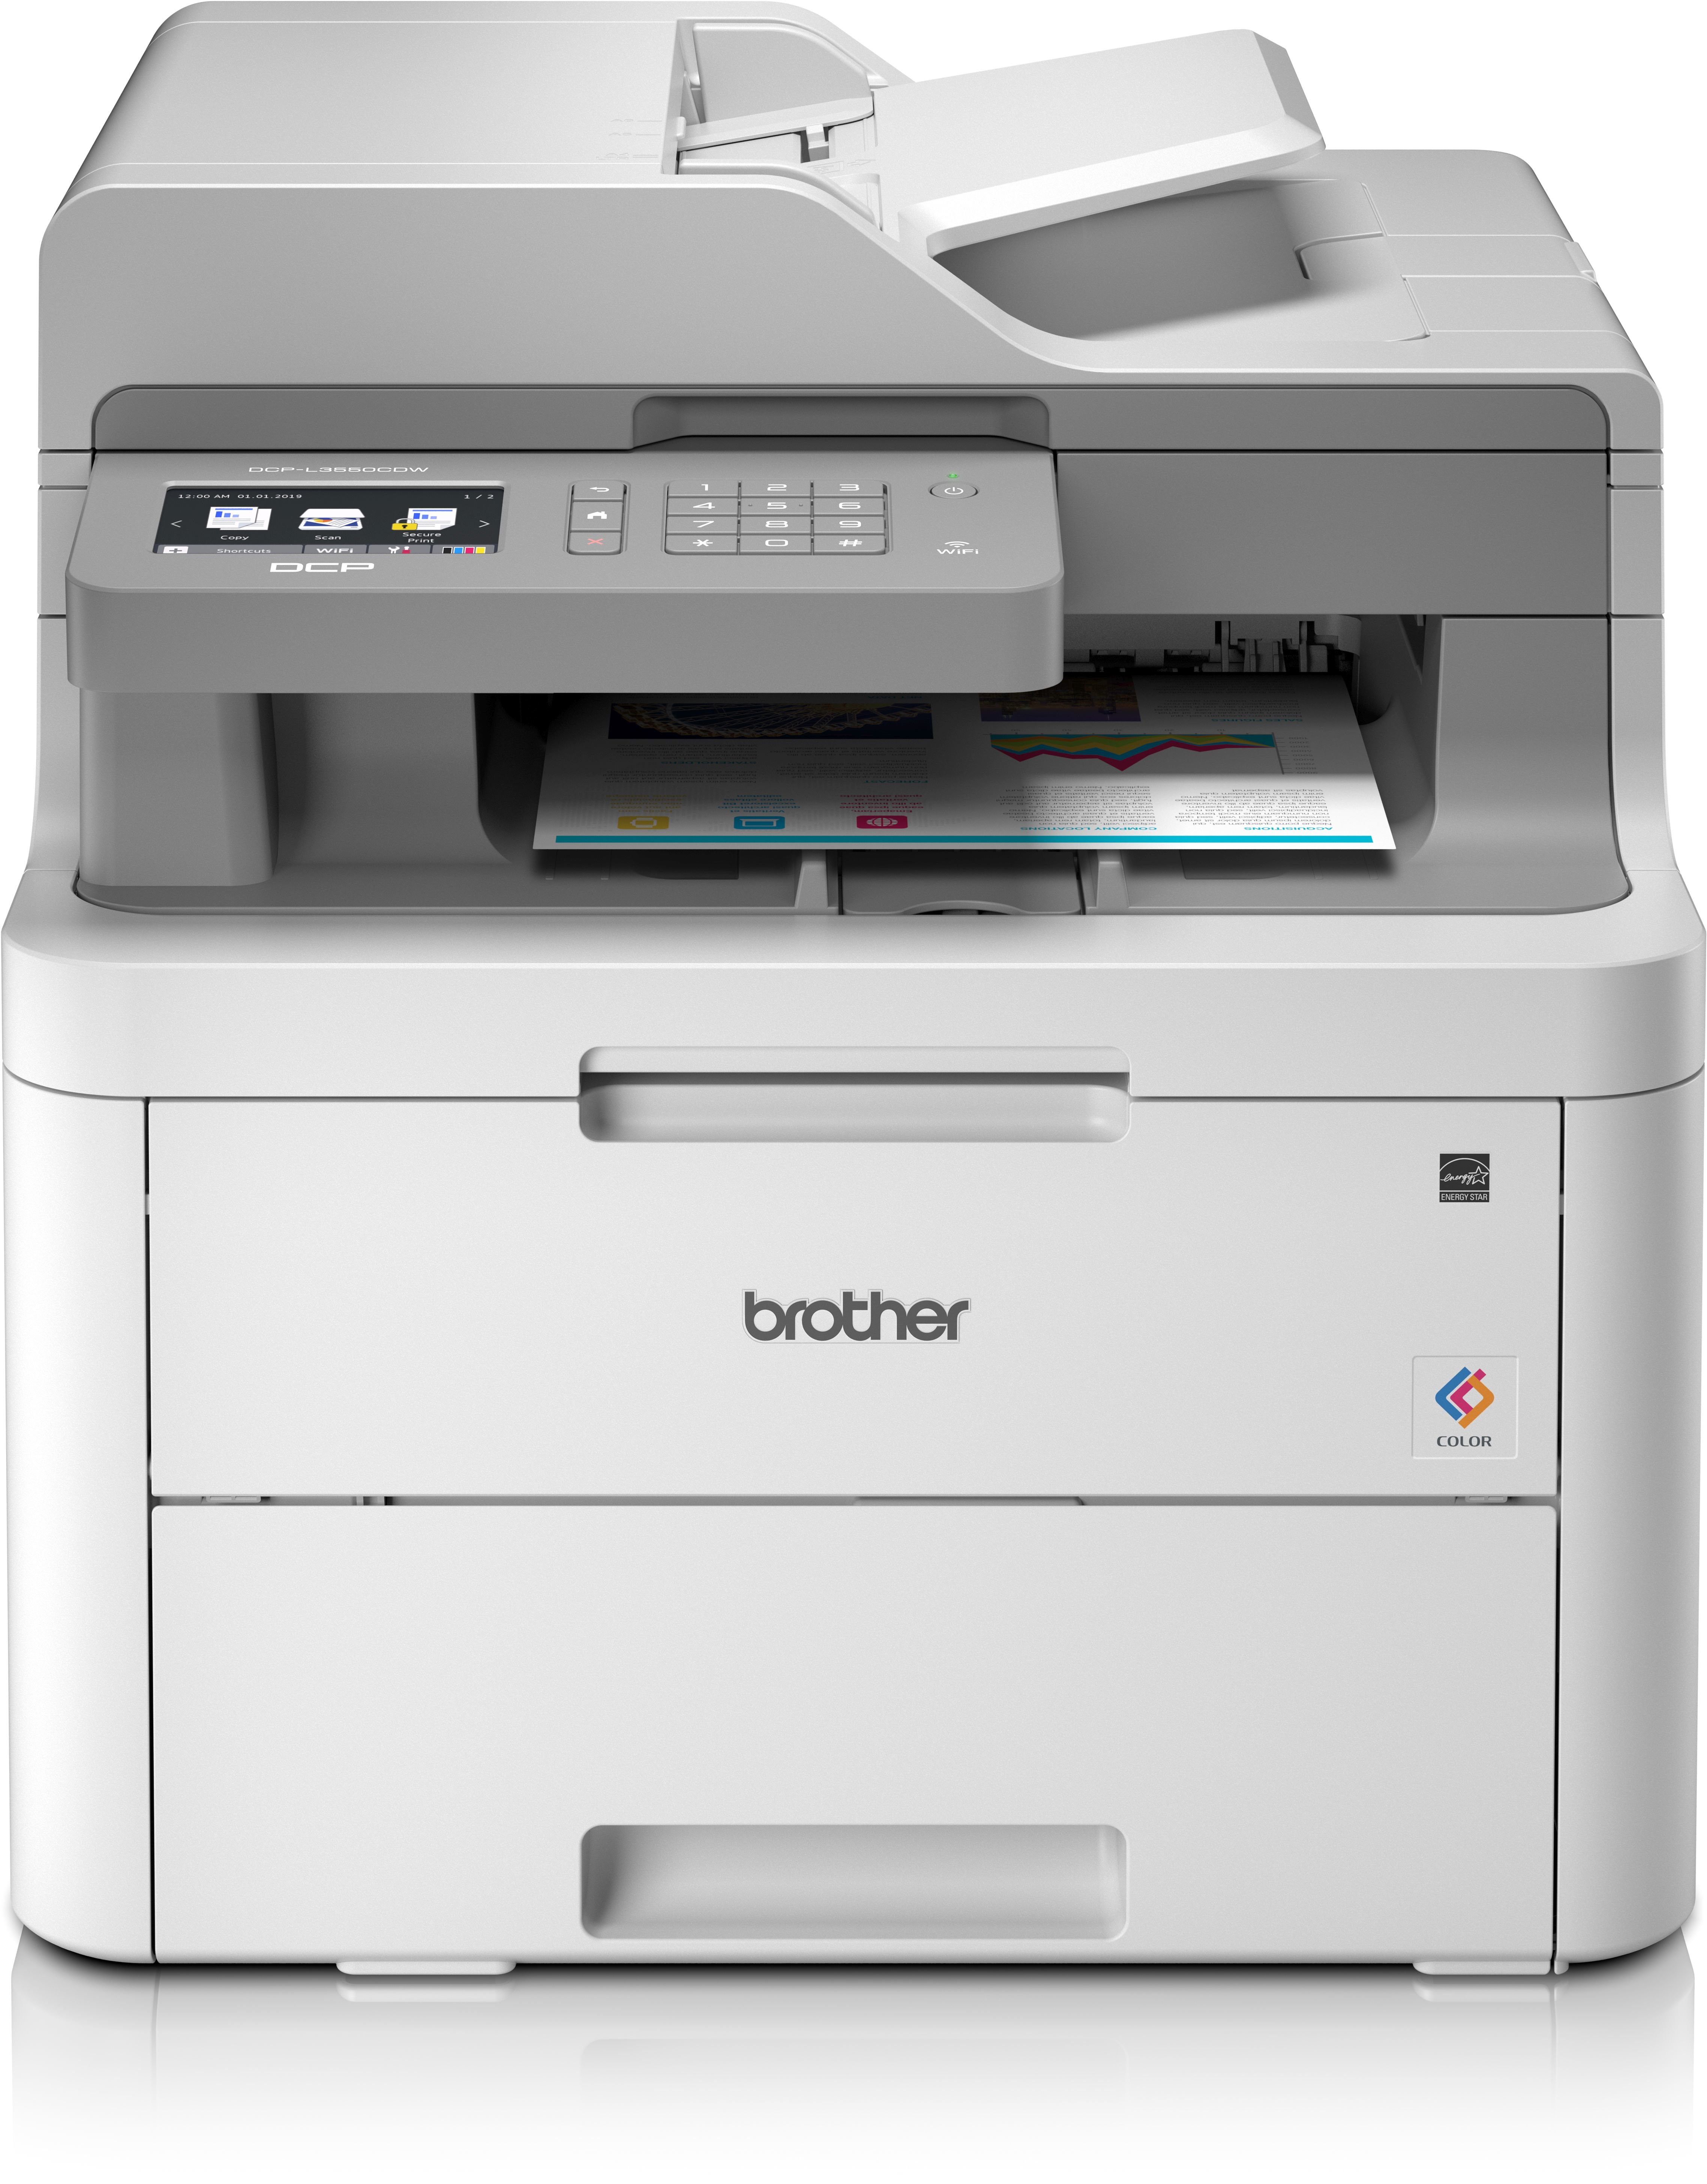 BROTHER LED Farbdrucker DCP-L3550 Multifunktion